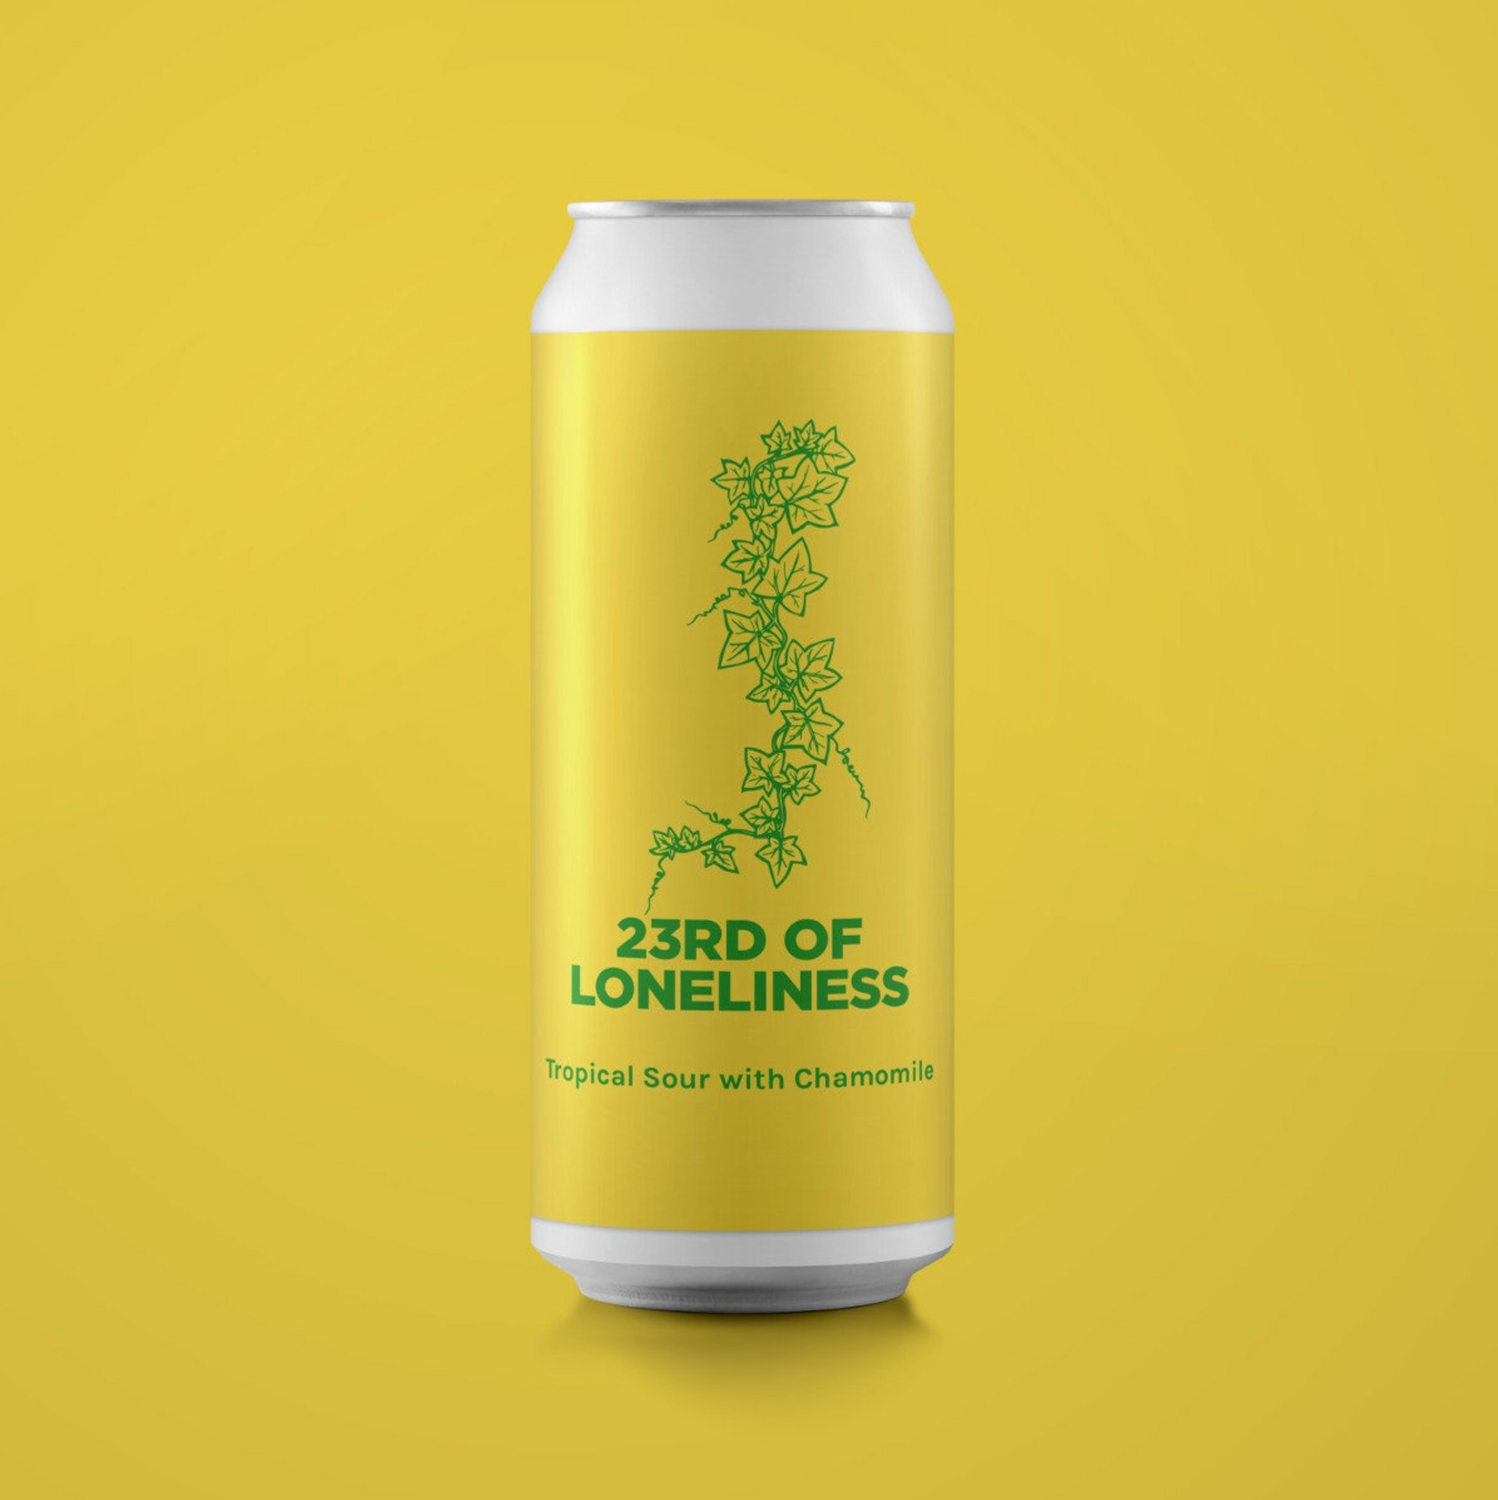 Pomona Island 23rd Of Loneliness Tropical Sour with Chamomile